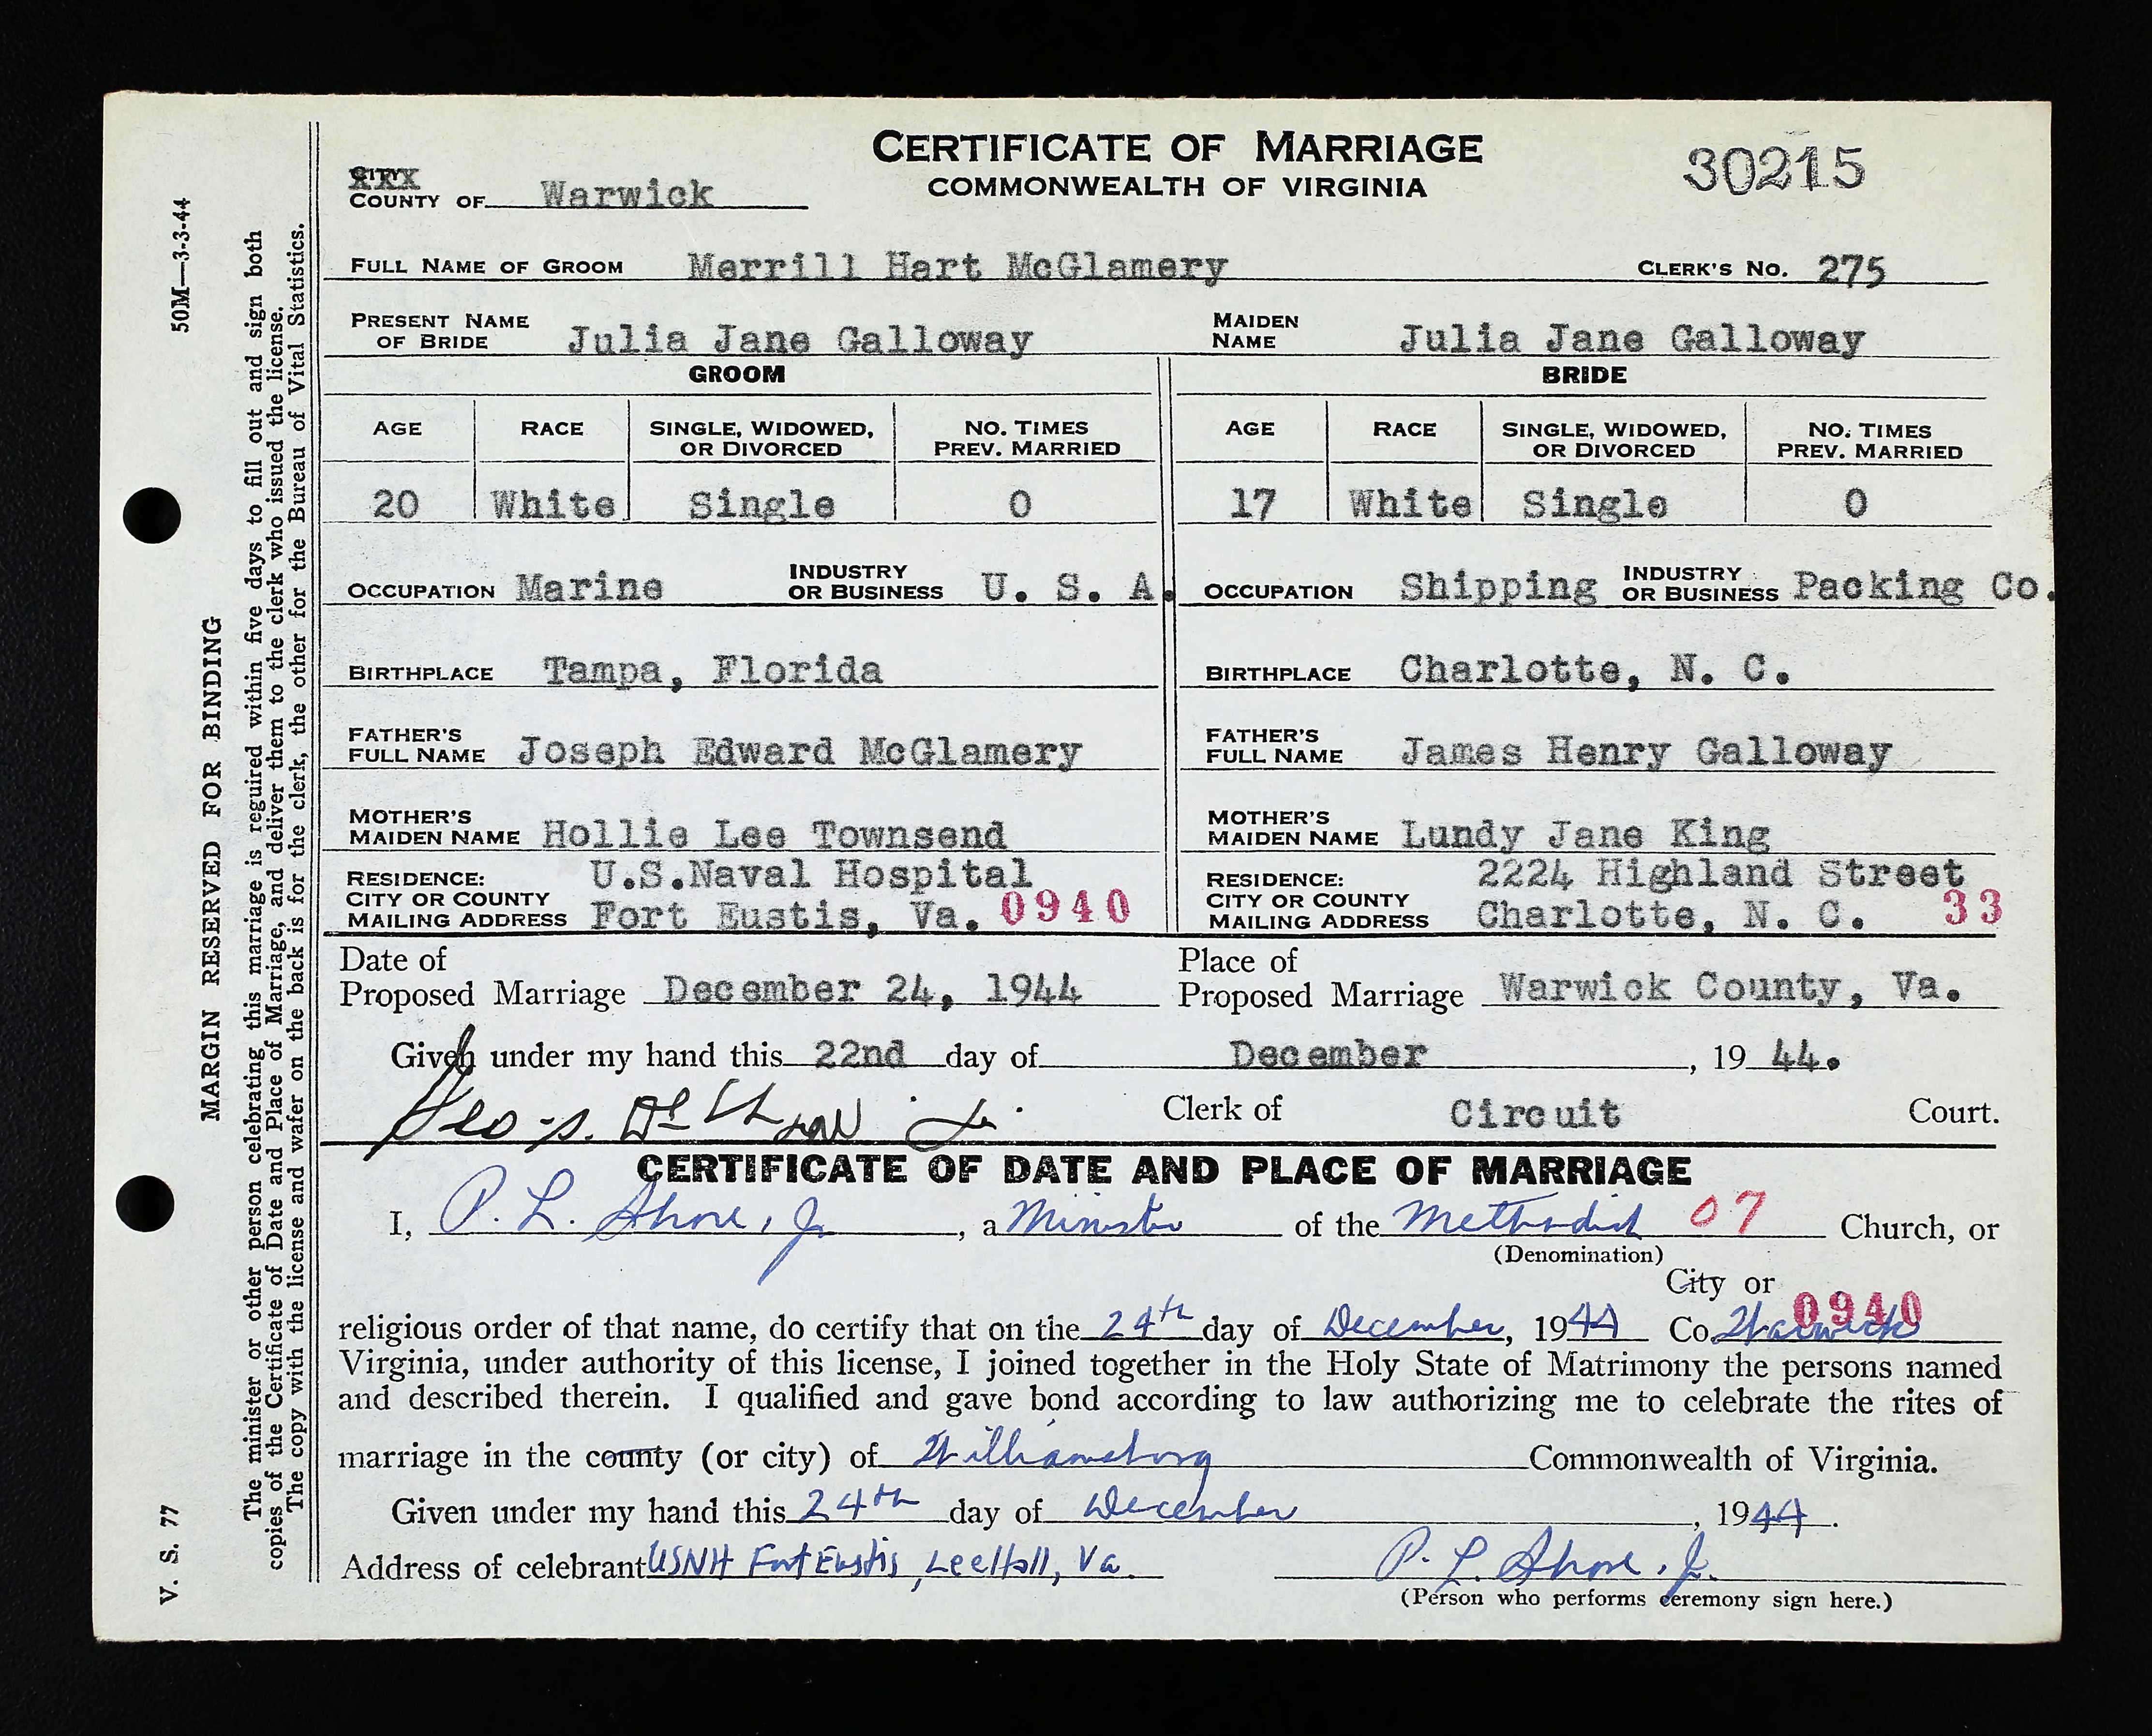 Certificate of Marriage for Merrill Hart McGlamery and Julia Jane Galloway